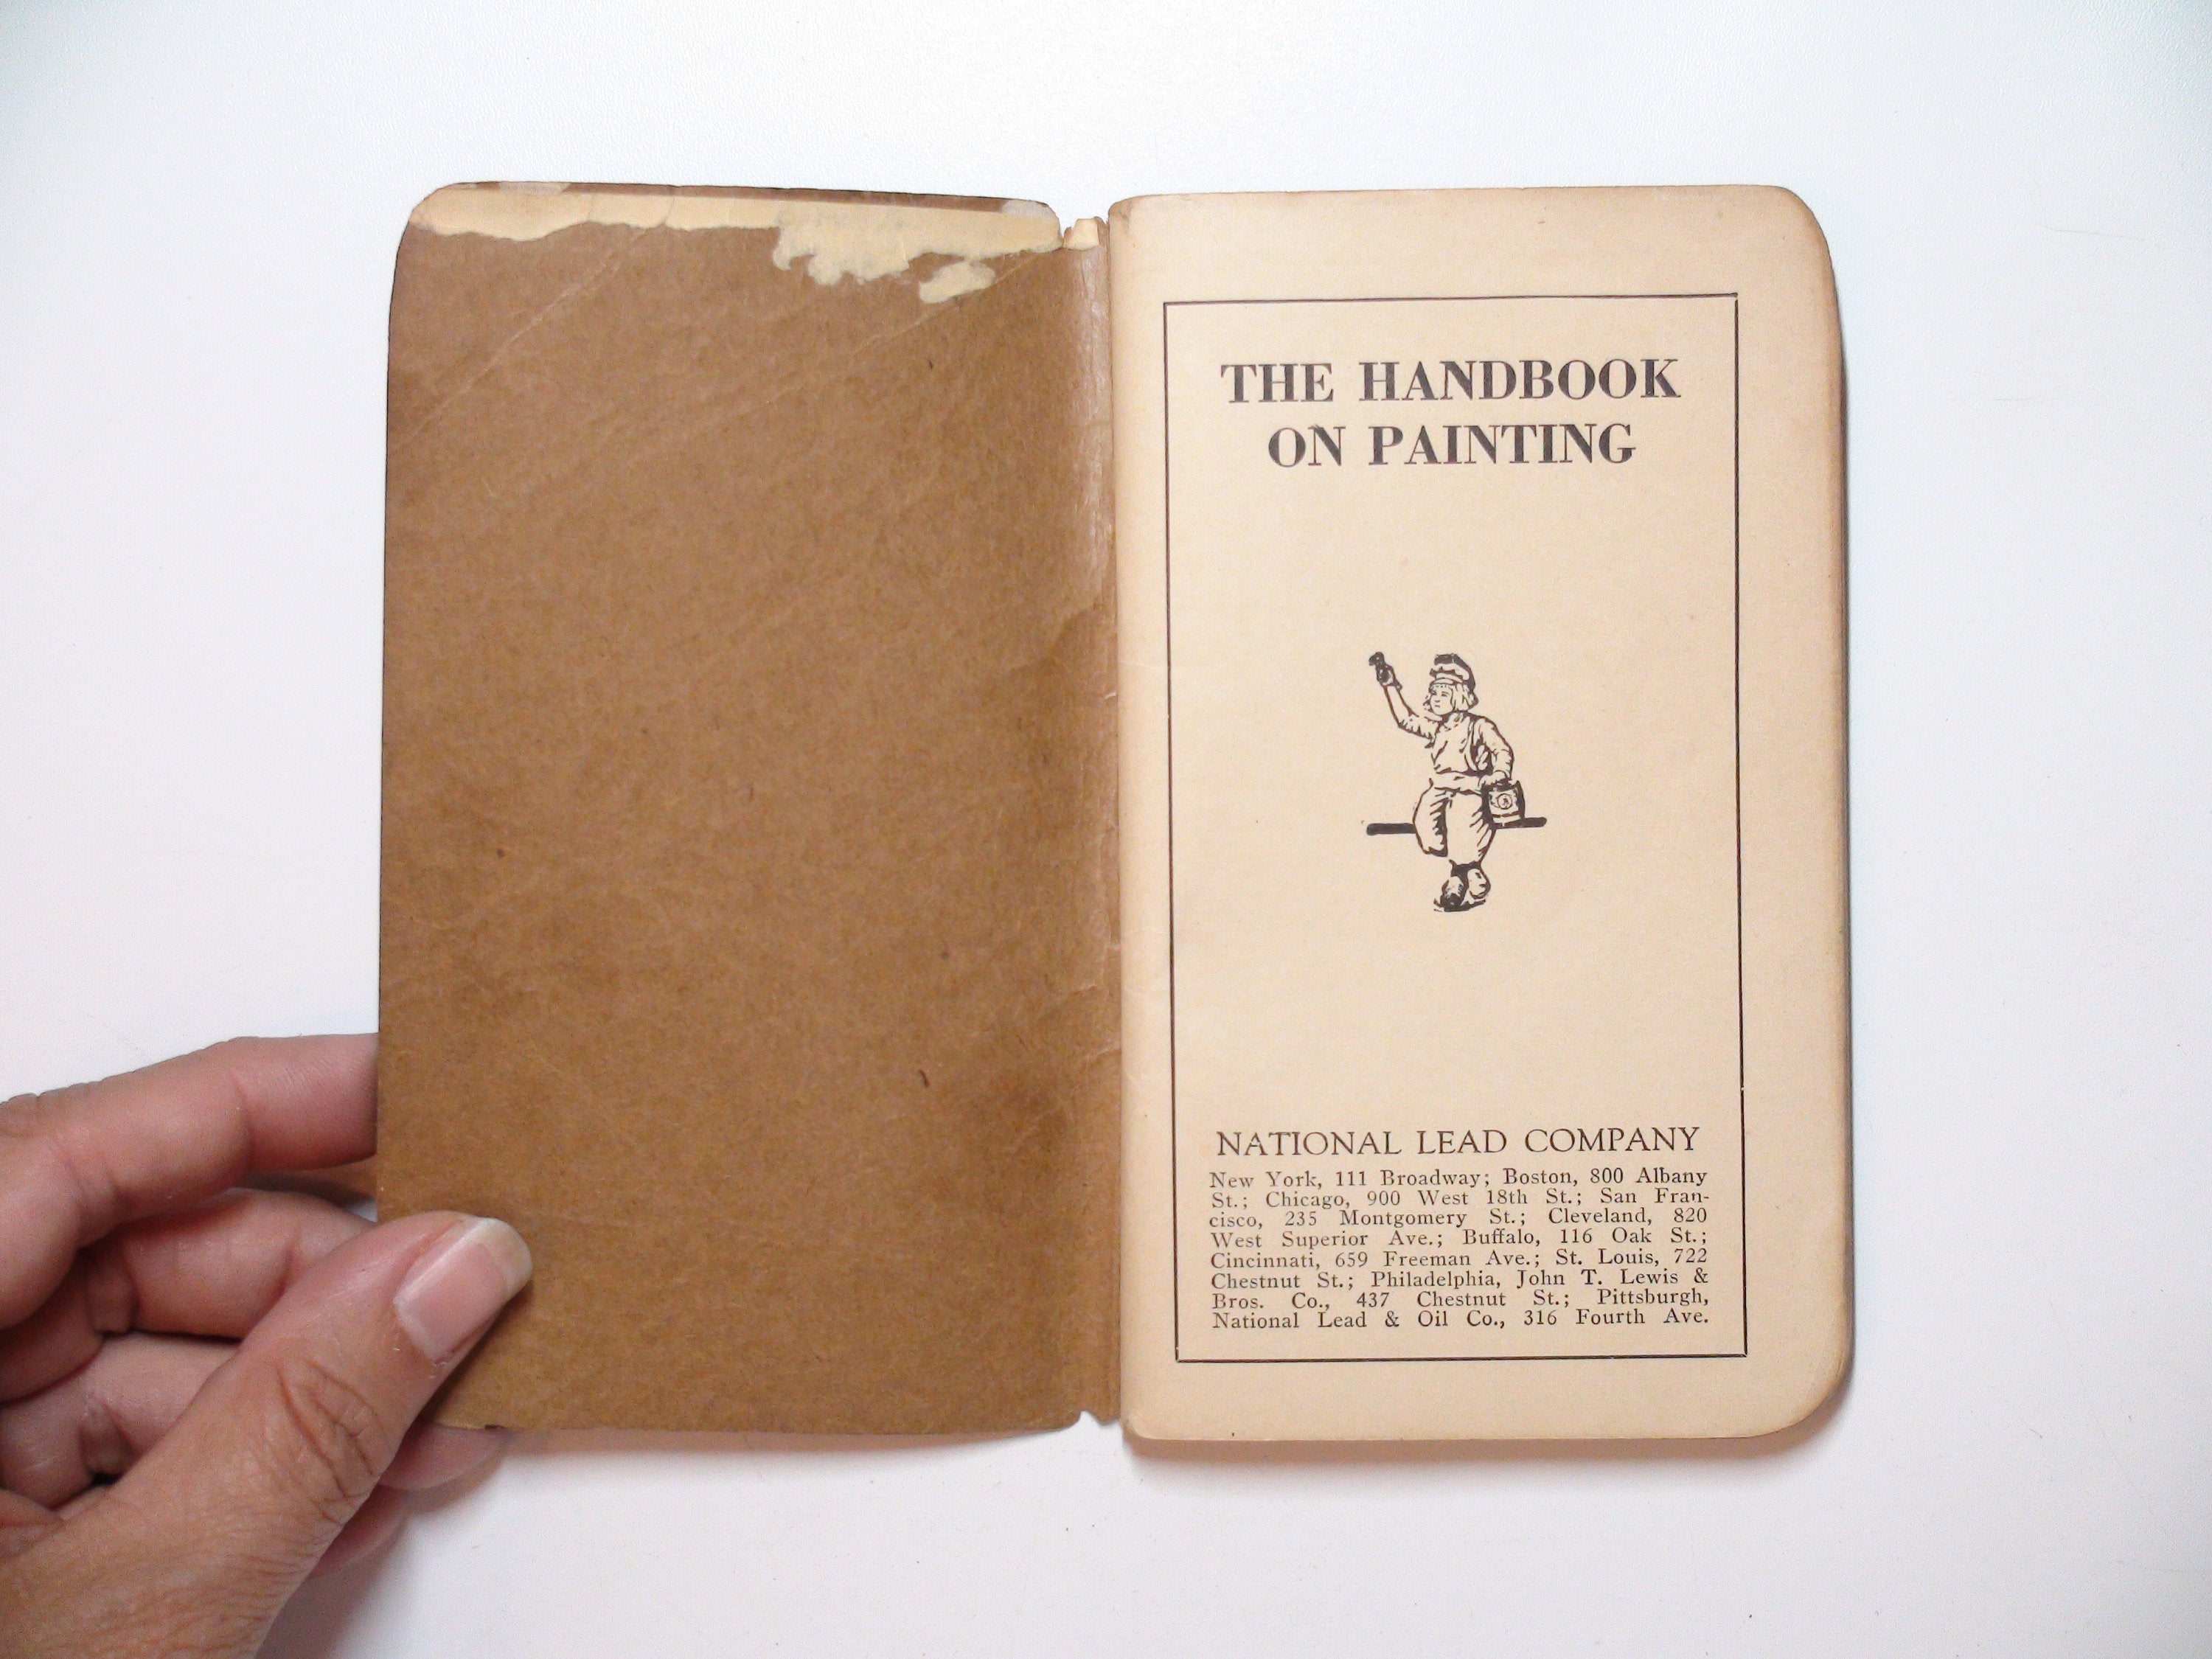 The Handbook on Painting, by the National Lead Company, 1st Ed, 1928